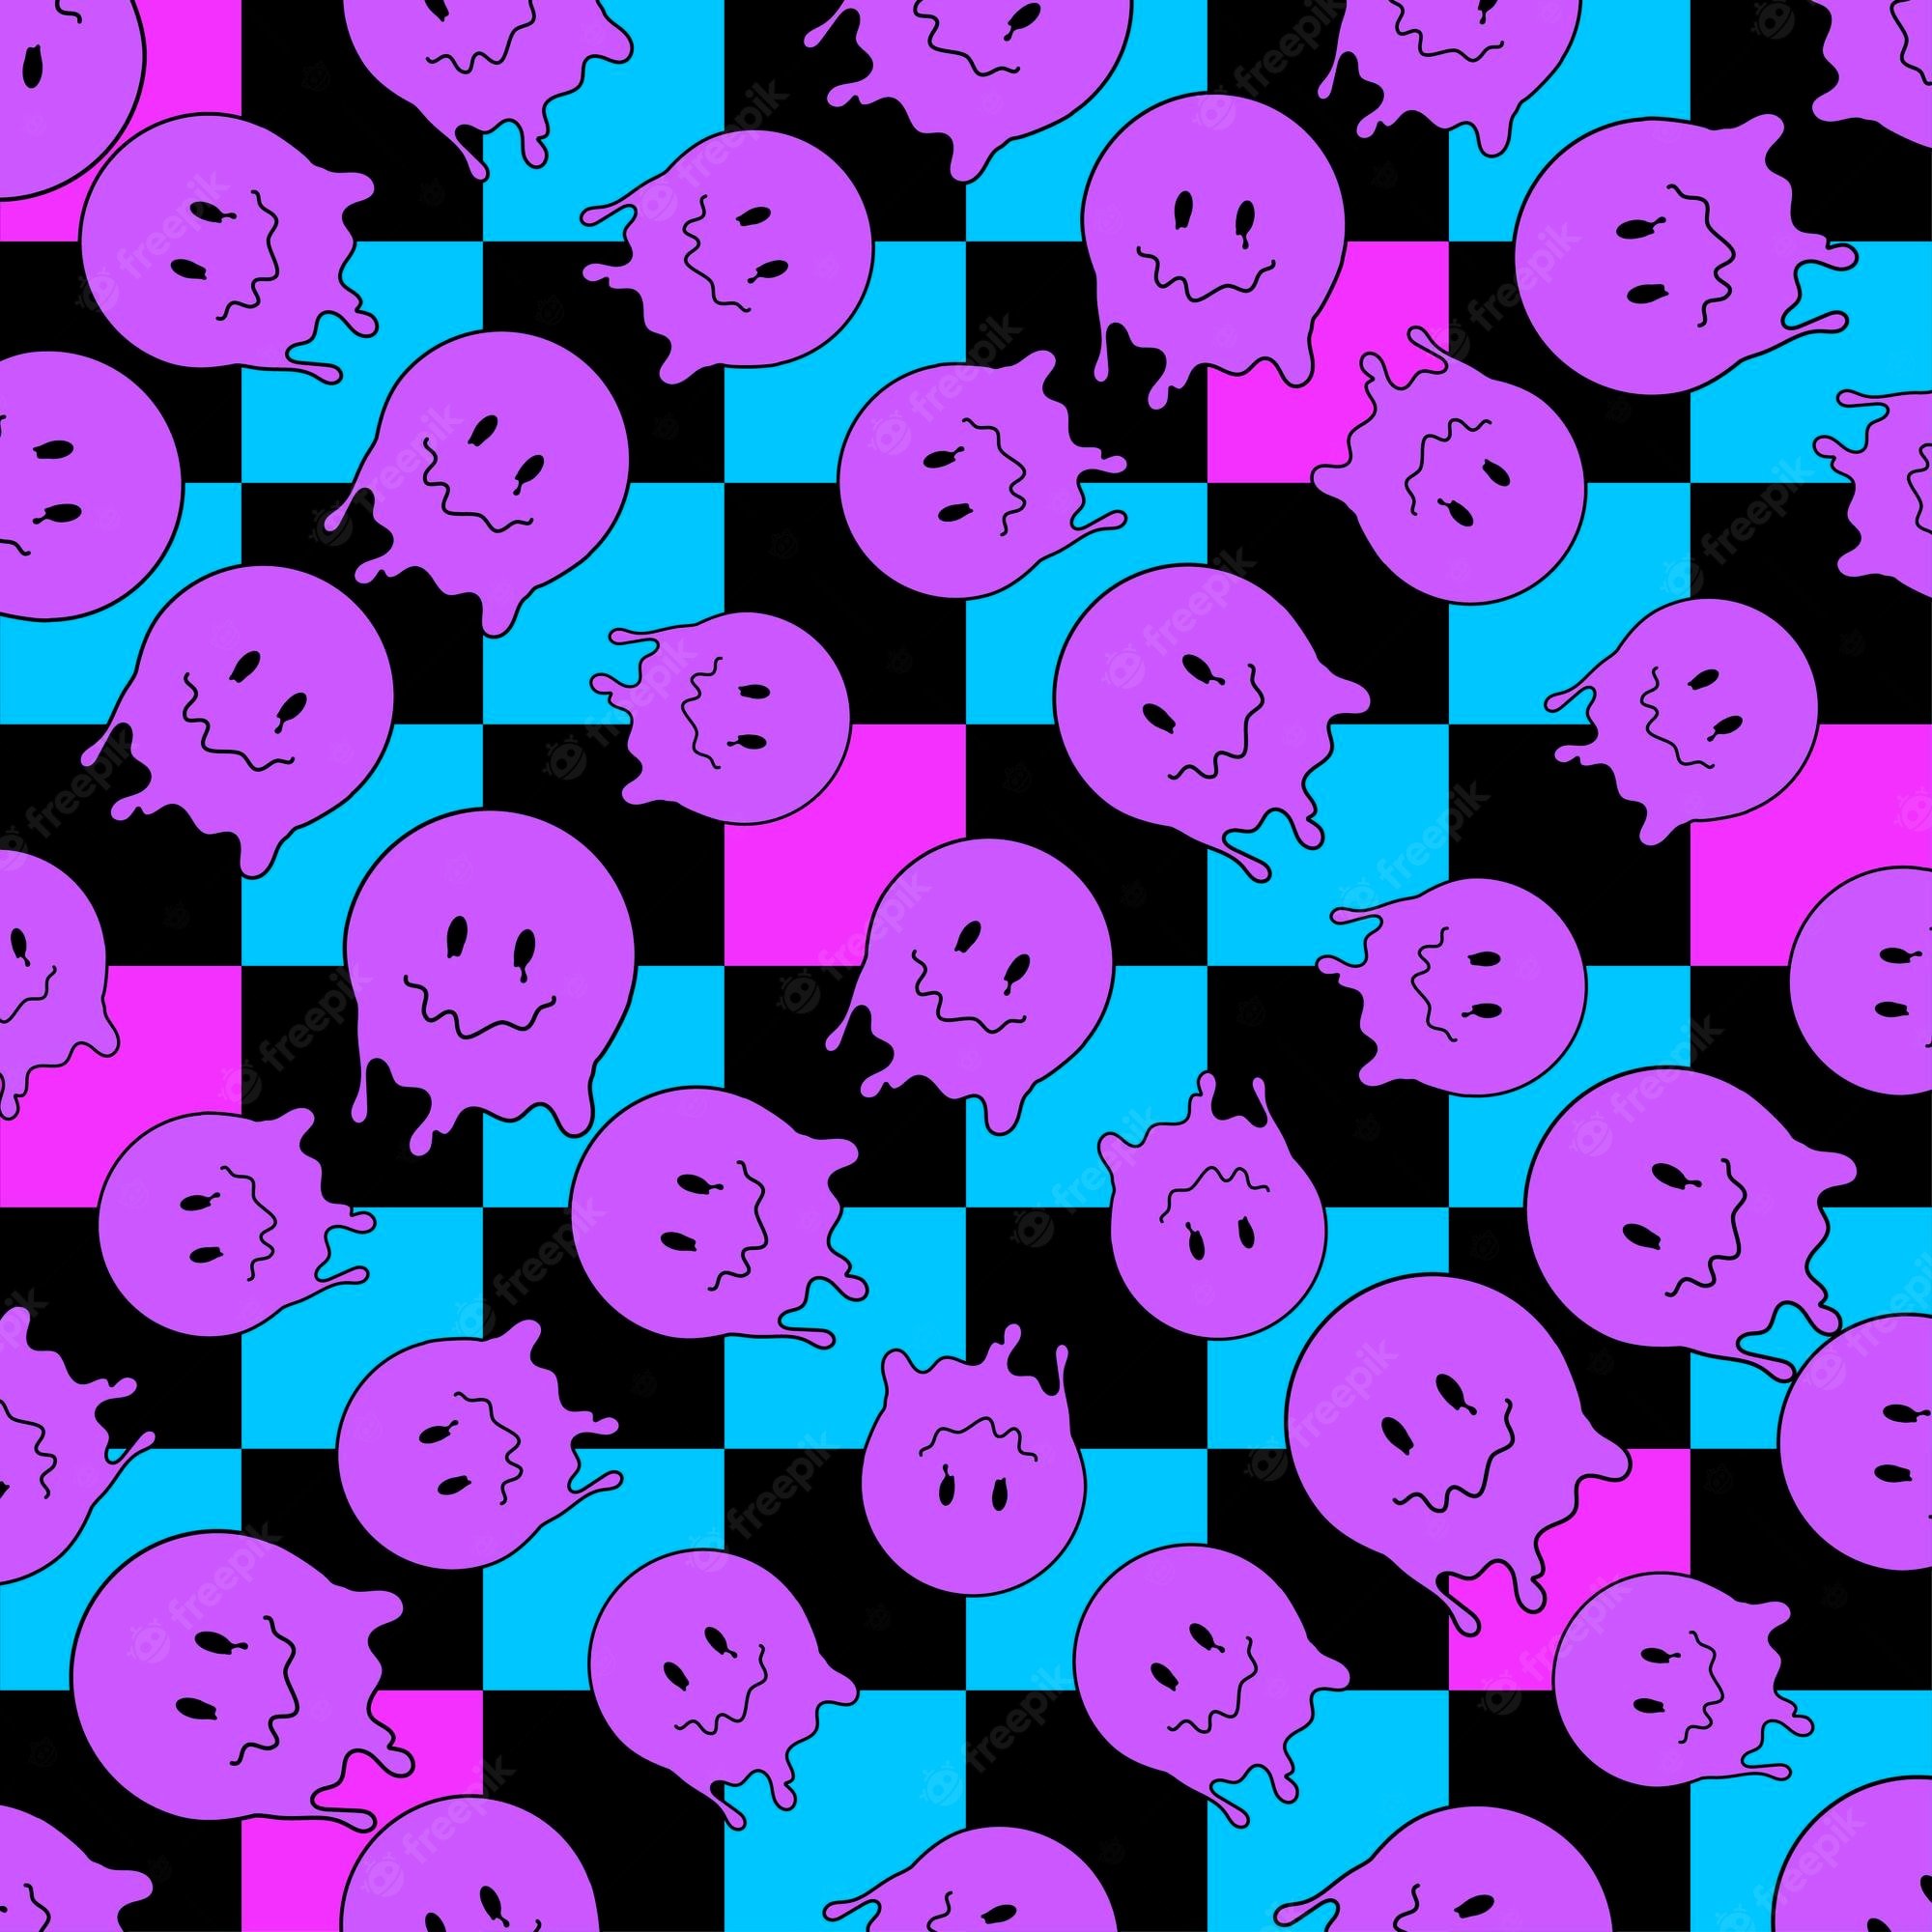 Melting Smiley Face Wallpapers - Wallpaper Cave